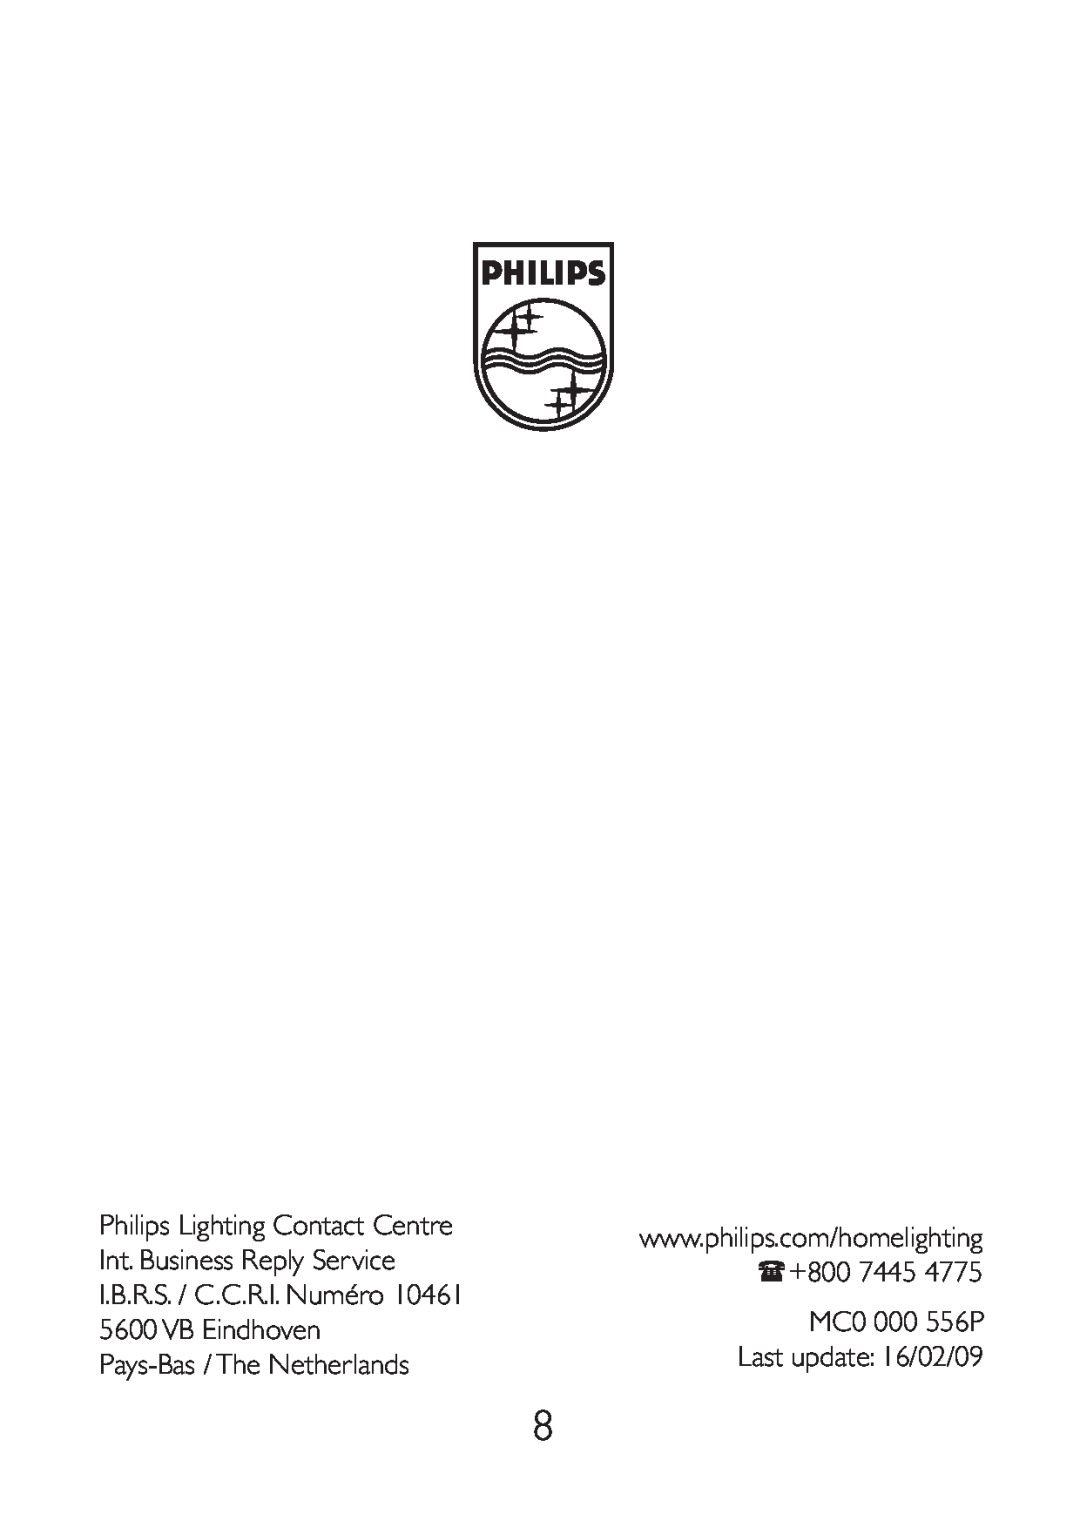 Philips 30187 Philips Lighting Contact Centre, Int. Business Reply Service, +800 7445, I.B.R.S. / C.C.R.I. Numéro 